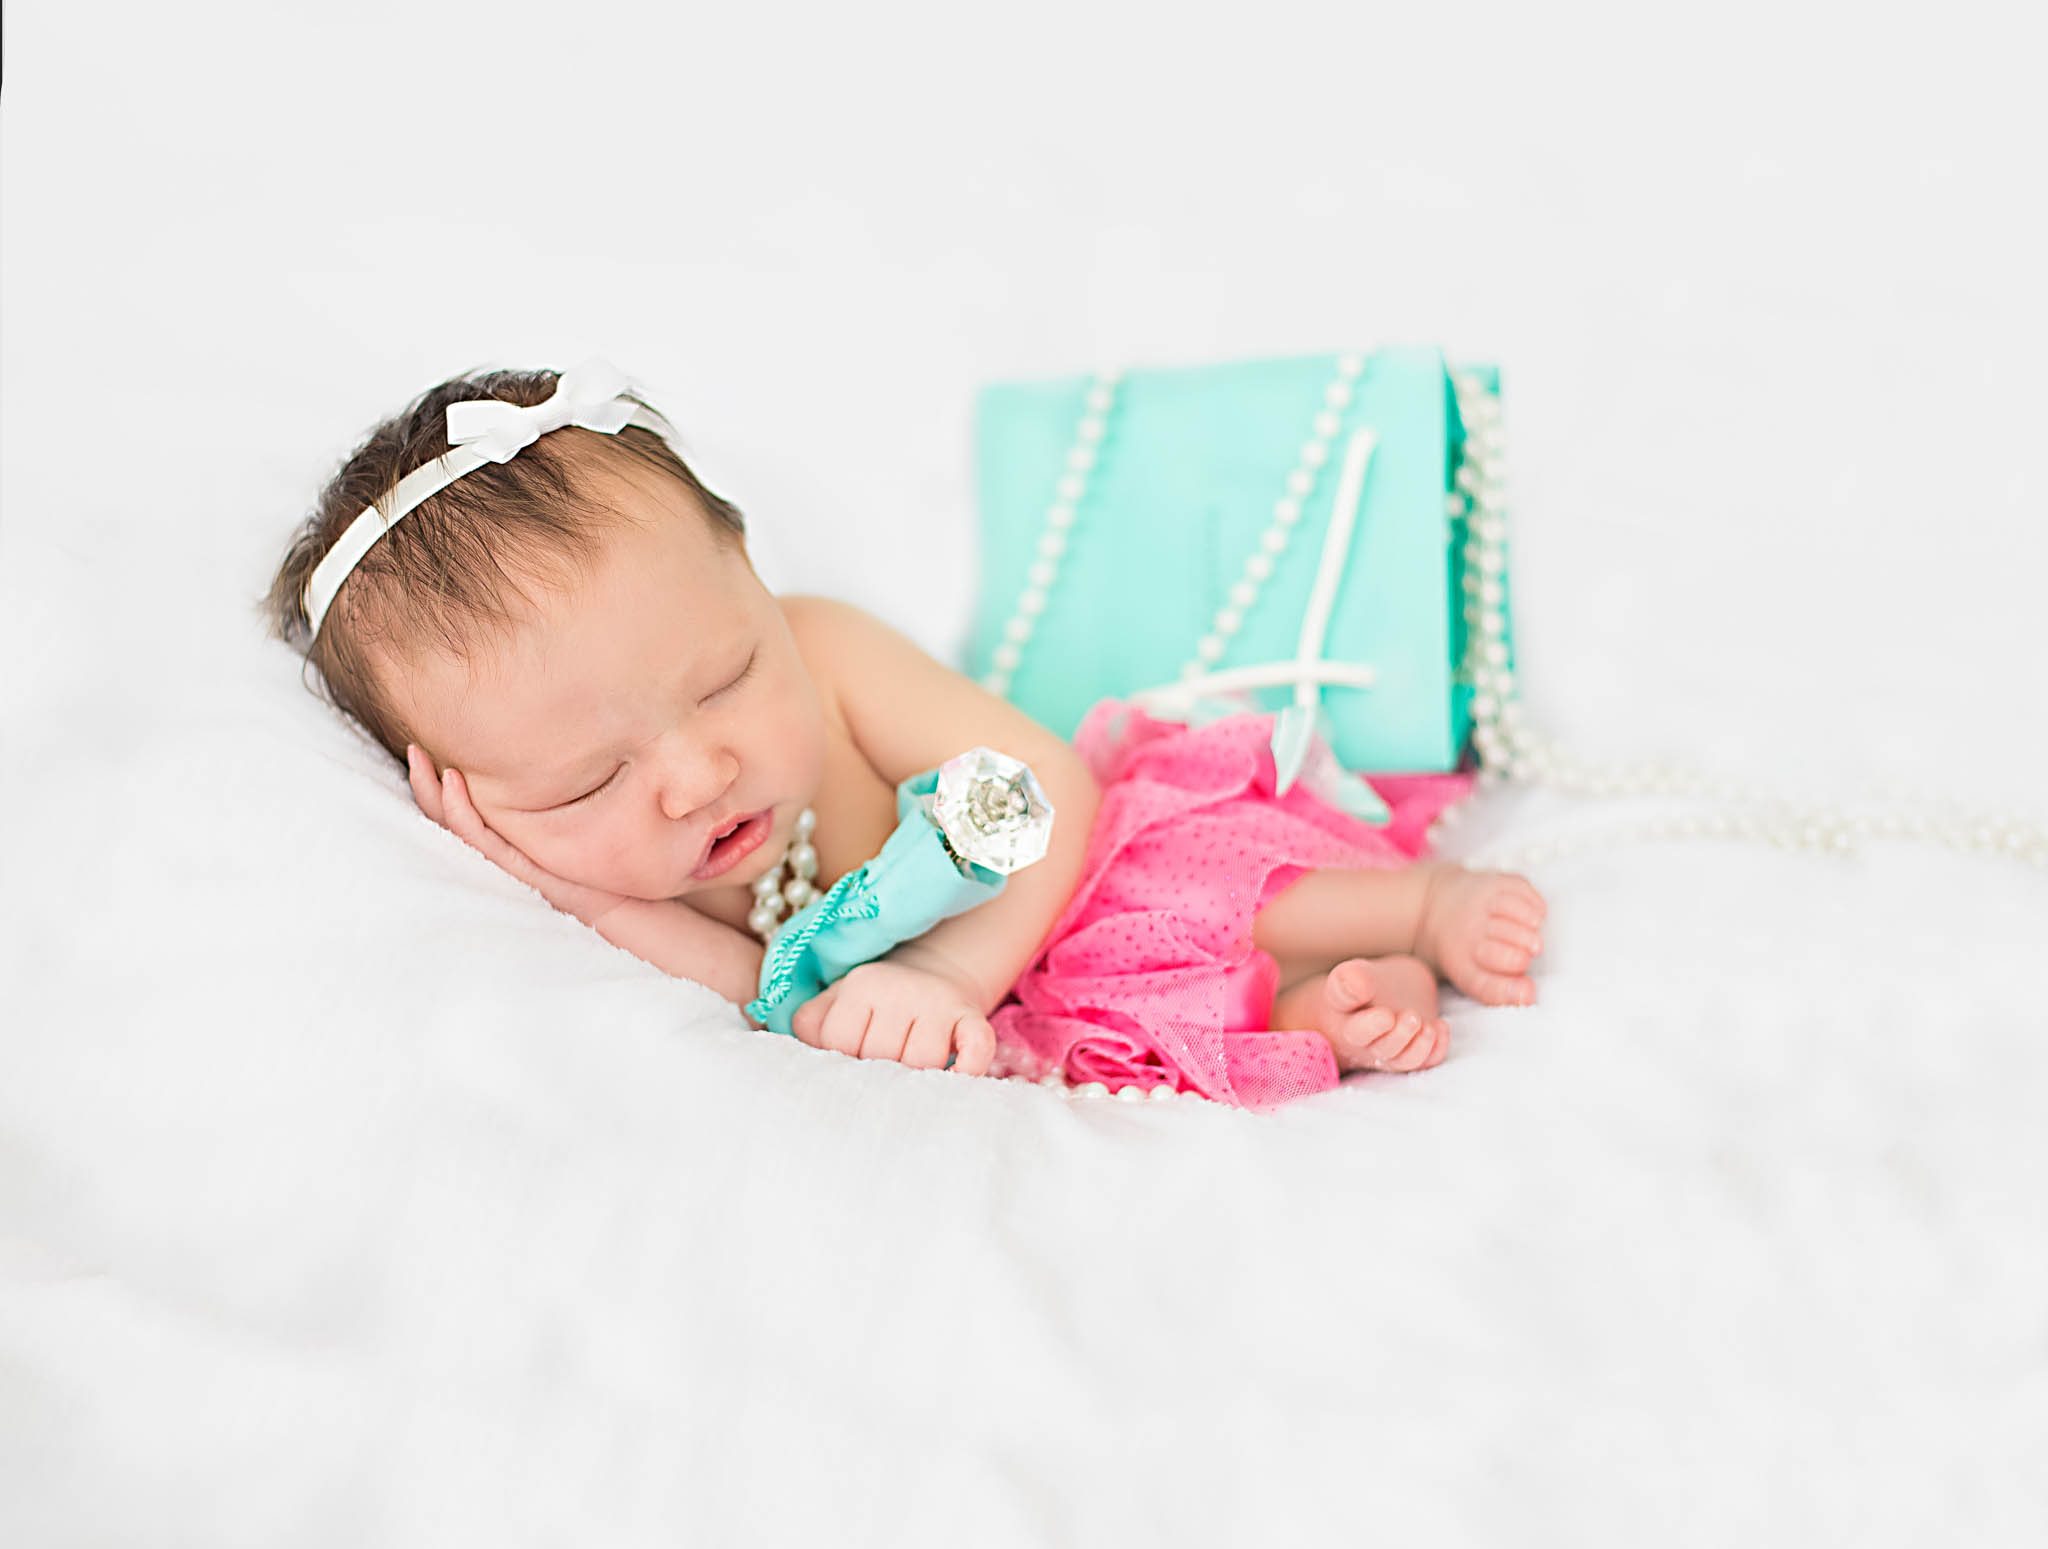 Newborn session with props